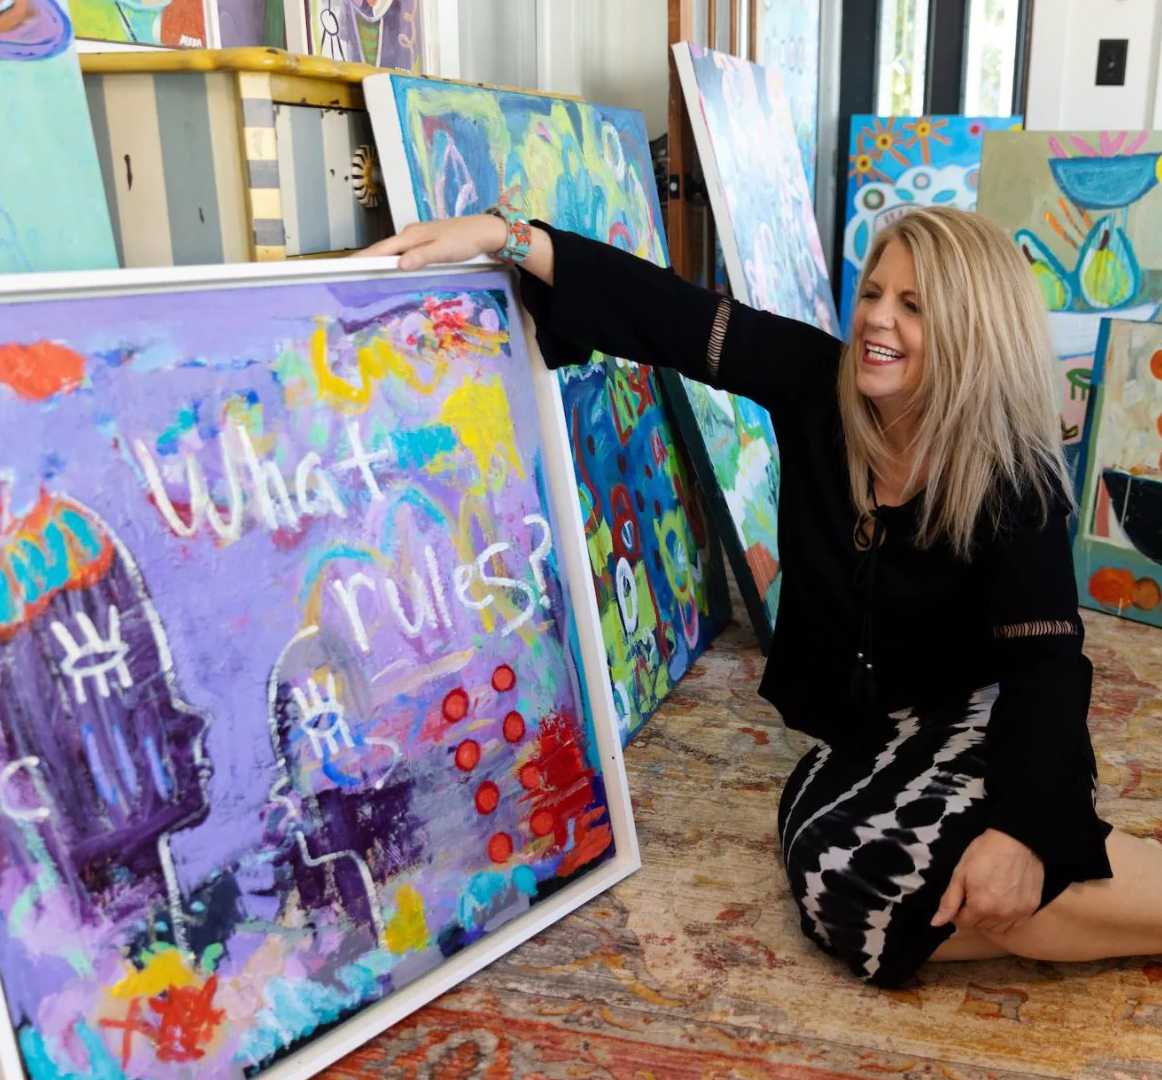 Artist Aleea Jaques smiles as she sits next to a purple abstract painting with the words "What rules?" painted on the canvas.